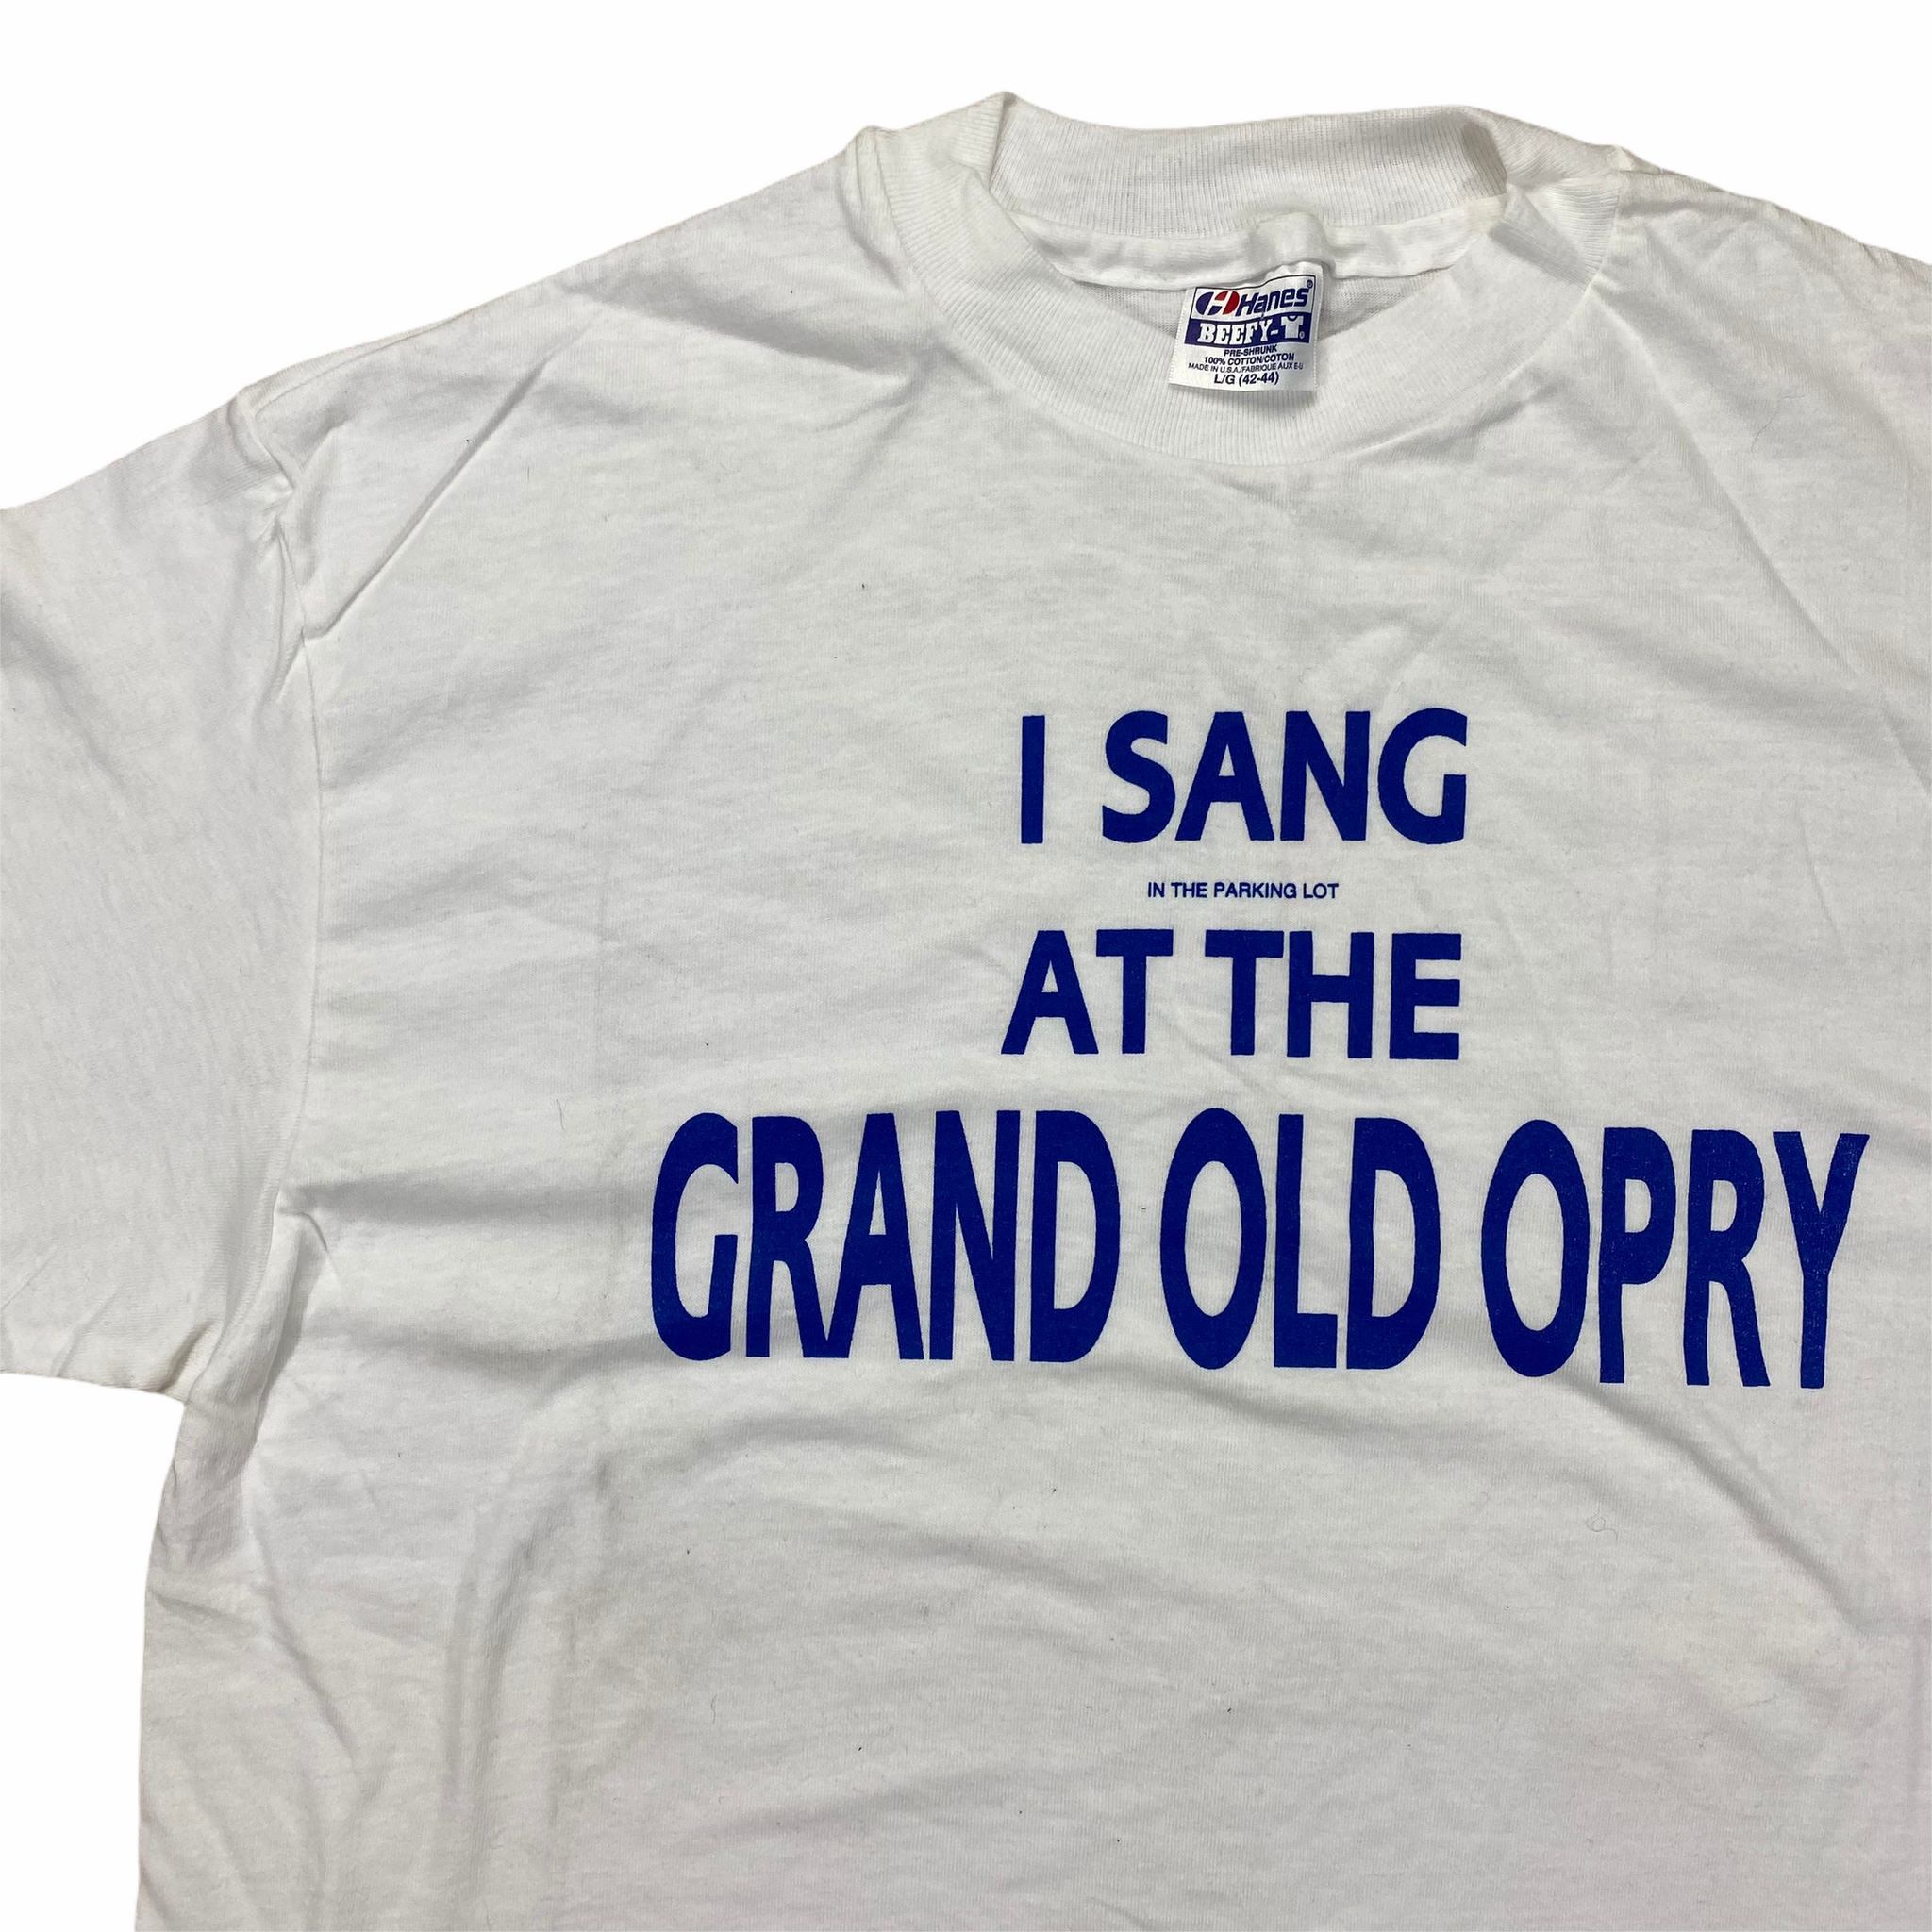 80s Grand Old Opry T-Shirt Large